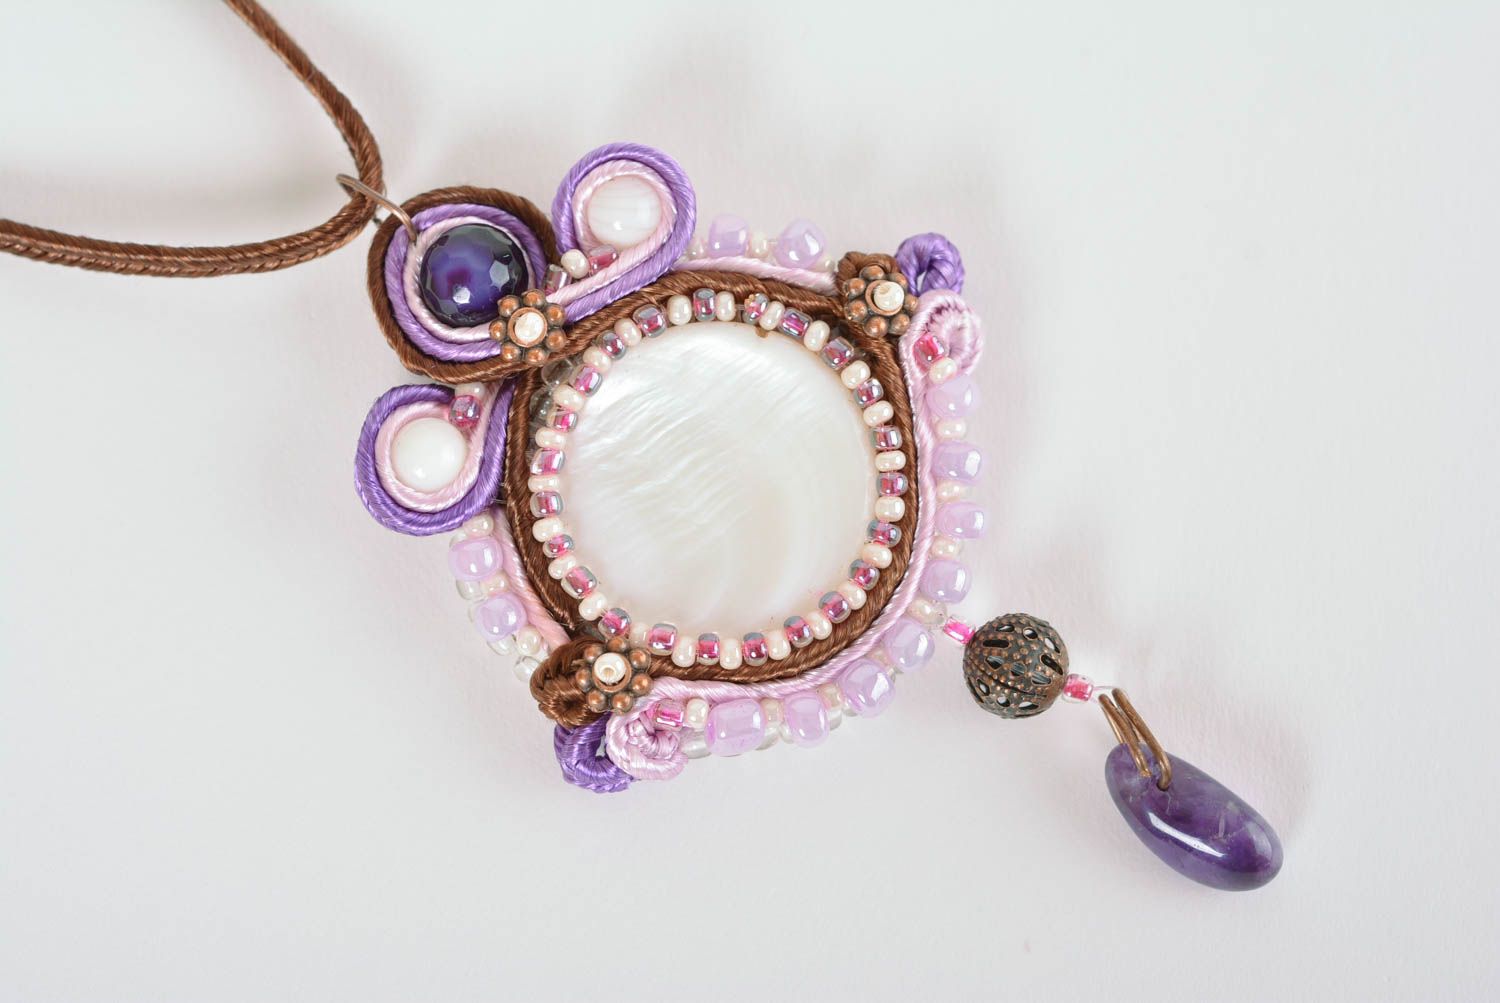 Handmade pendant soutache necklace evening accessories with natural stones photo 4